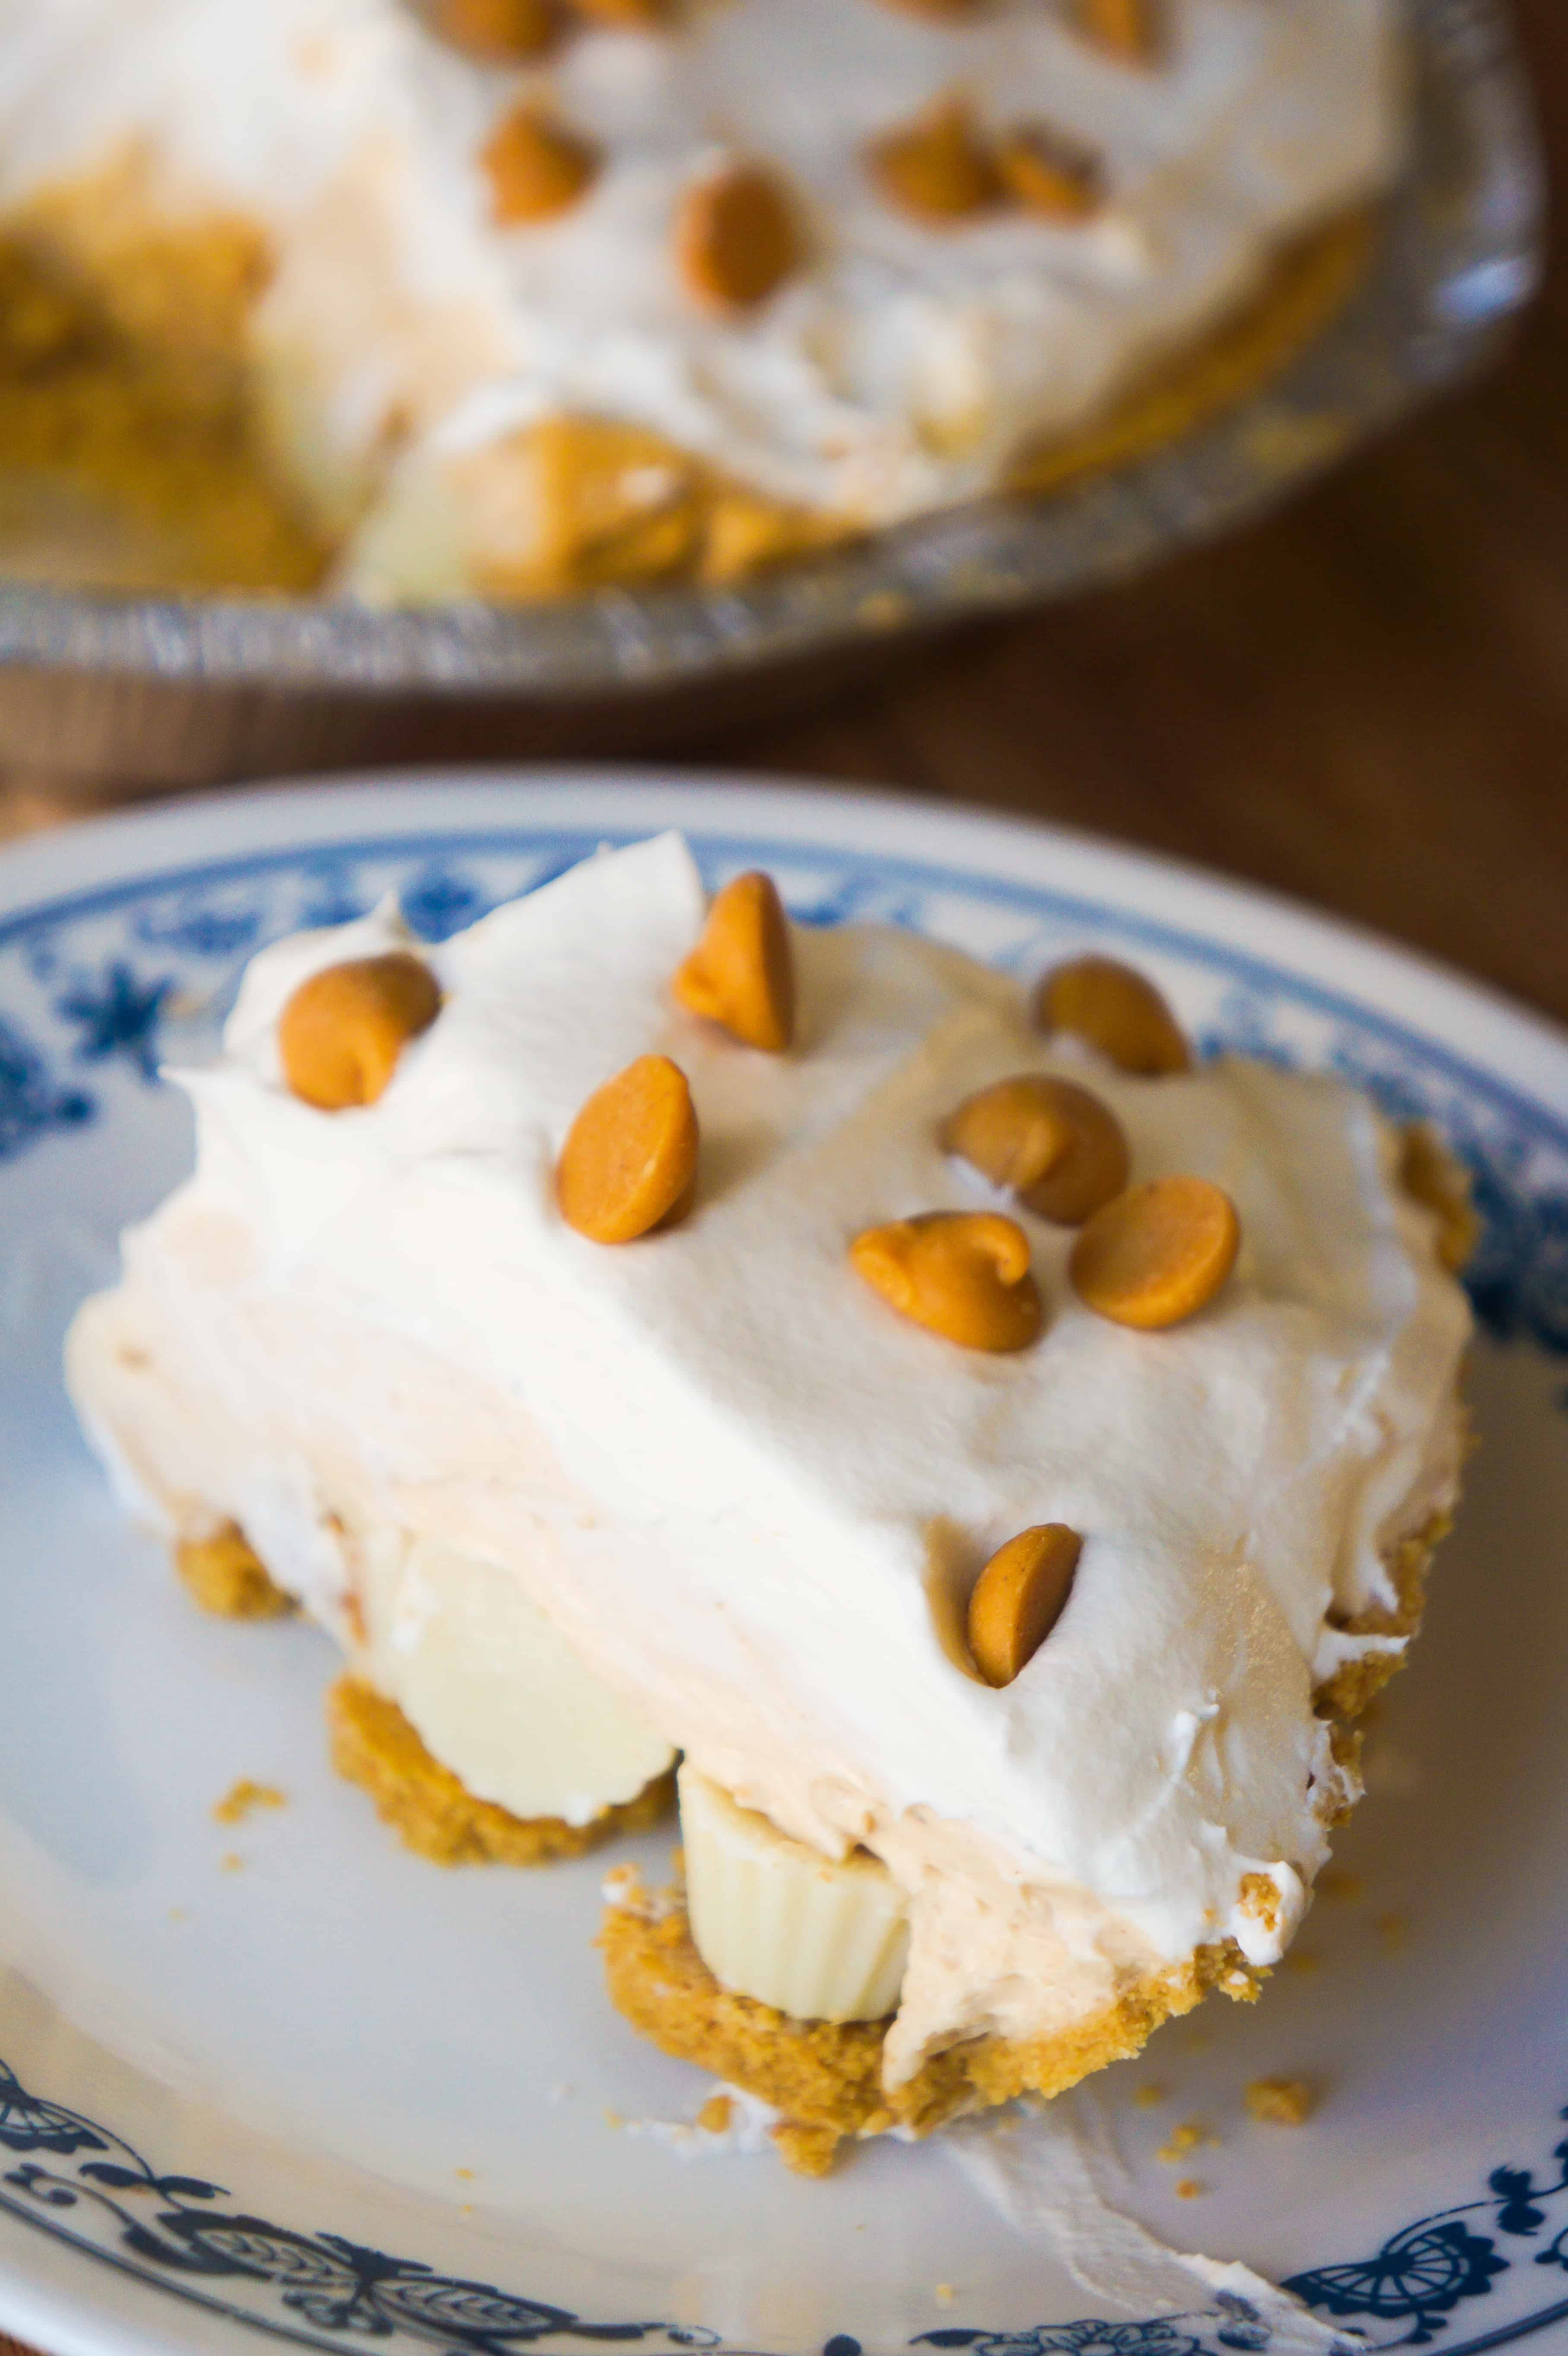 White Chocolate Peanut Butter Cup Pie is an easy no bake dessert recipe using instant pudding.